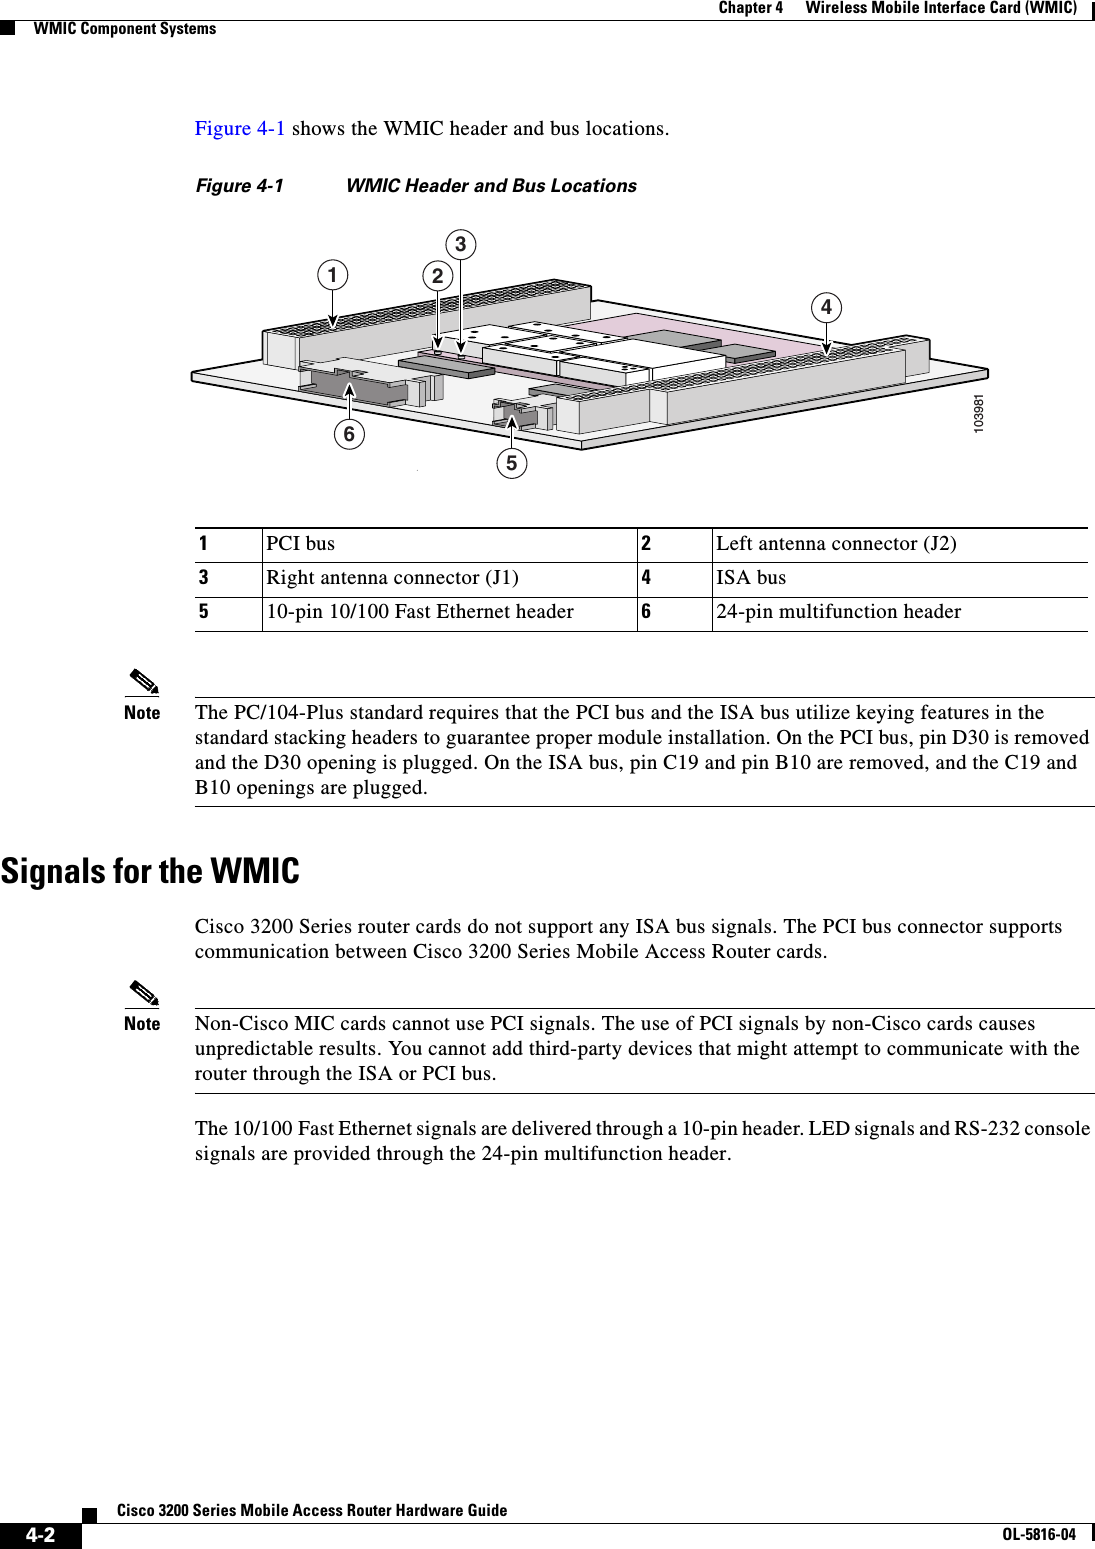  4-2Cisco 3200 Series Mobile Access Router Hardware GuideOL-5816-04Chapter 4      Wireless Mobile Interface Card (WMIC)WMIC Component SystemsFigure 4-1 shows the WMIC header and bus locations.Figure 4-1 WMIC Header and Bus LocationsNote The PC/104-Plus standard requires that the PCI bus and the ISA bus utilize keying features in the standard stacking headers to guarantee proper module installation. On the PCI bus, pin D30 is removed and the D30 opening is plugged. On the ISA bus, pin C19 and pin B10 are removed, and the C19 and B10 openings are plugged. Signals for the WMICCisco 3200 Series router cards do not support any ISA bus signals. The PCI bus connector supports communication between Cisco 3200 Series Mobile Access Router cards. Note Non-Cisco MIC cards cannot use PCI signals. The use of PCI signals by non-Cisco cards causes unpredictable results. You cannot add third-party devices that might attempt to communicate with the router through the ISA or PCI bus. The 10/100 Fast Ethernet signals are delivered through a 10-pin header. LED signals and RS-232 console signals are provided through the 24-pin multifunction header. 1PCI bus 2Left antenna connector (J2)3Right antenna connector (J1) 4ISA bus510-pin 10/100 Fast Ethernet header 624-pin multifunction header103981421356